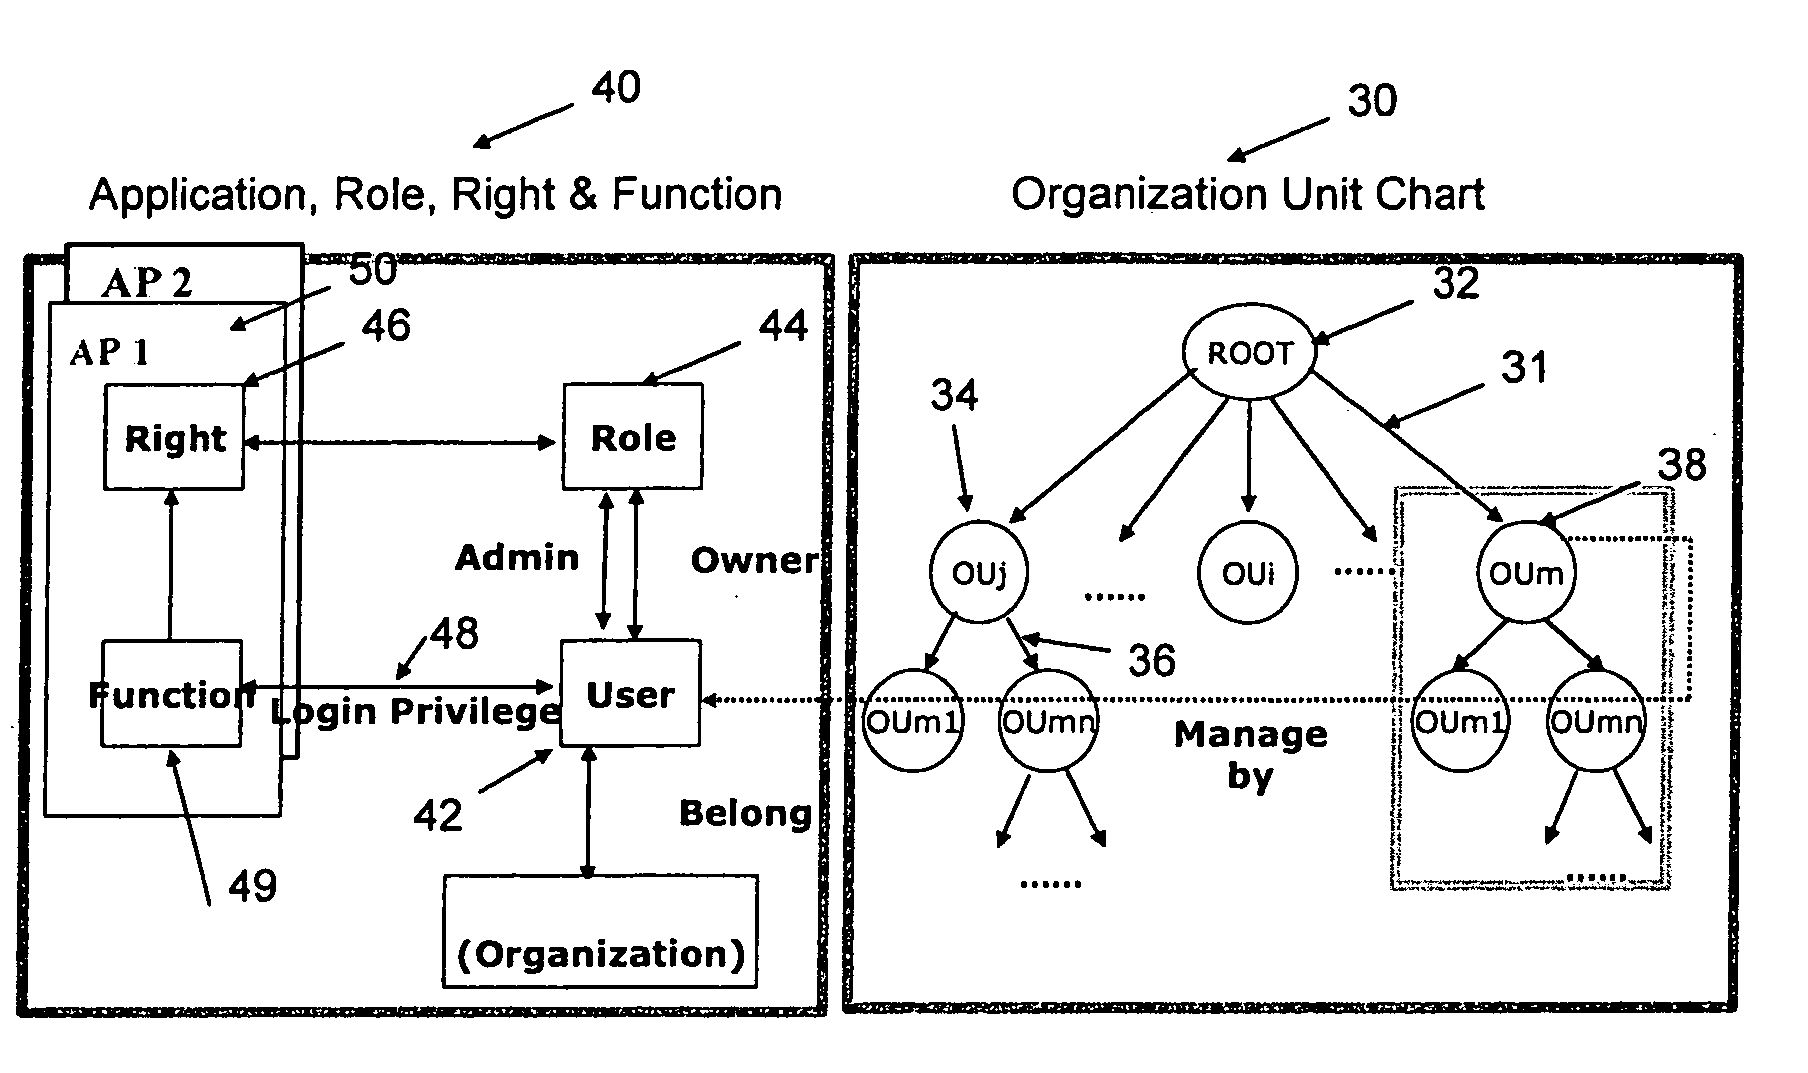 Organizational role-based controlled access management system